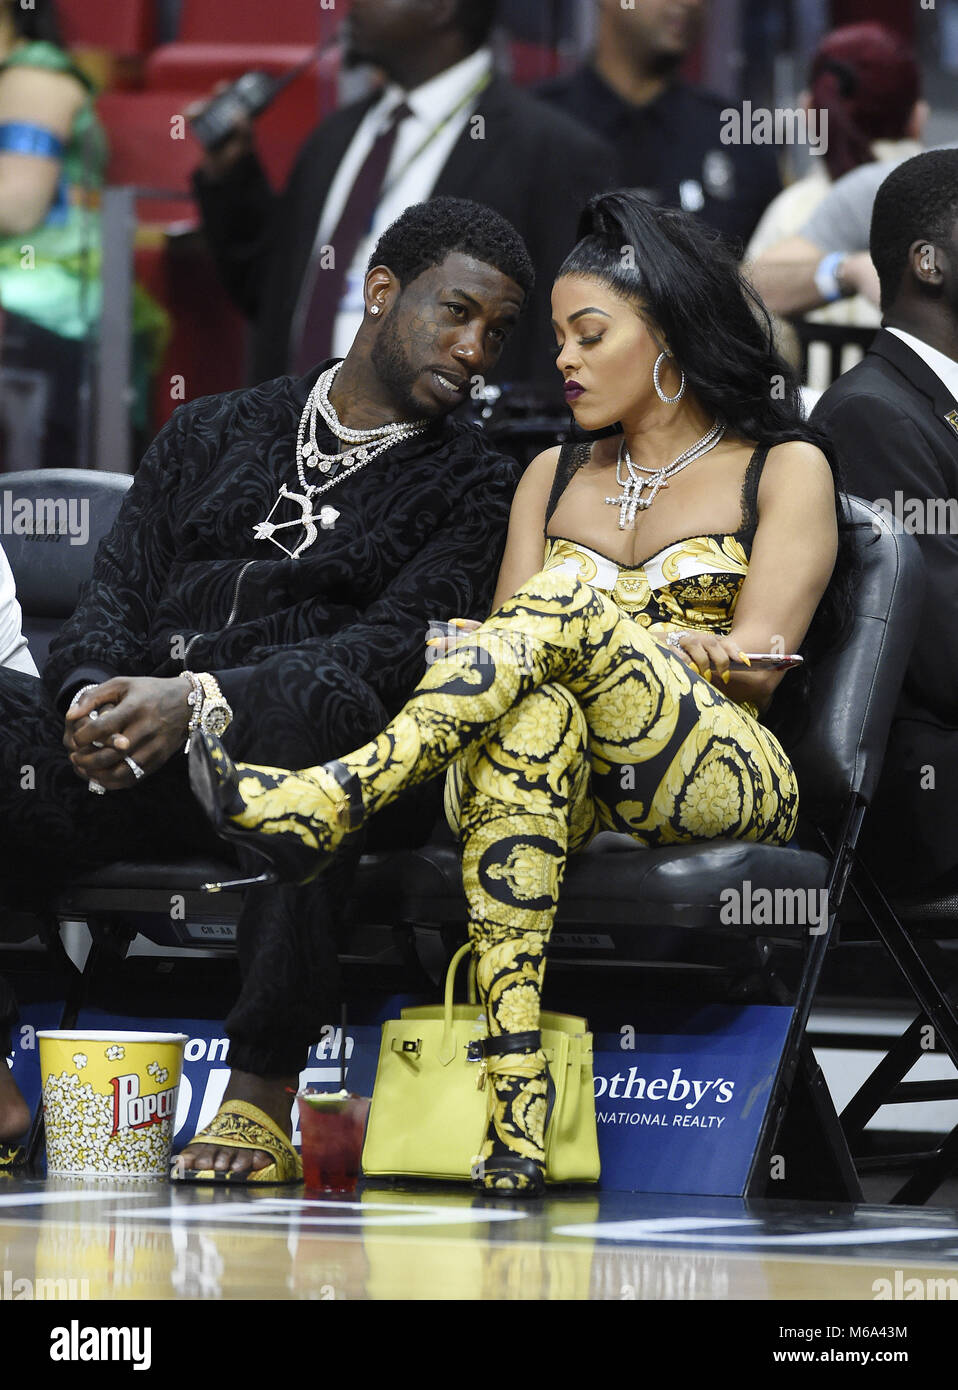 Miami, FL, USA. 01st Mar, 2018. Rapper Gucci Mane and his wife Keyshia  Ka'Oir watch the Los Angeles Lakers against the Miami Heat NBA game at the  AmericanAirlines Arena on March 1,